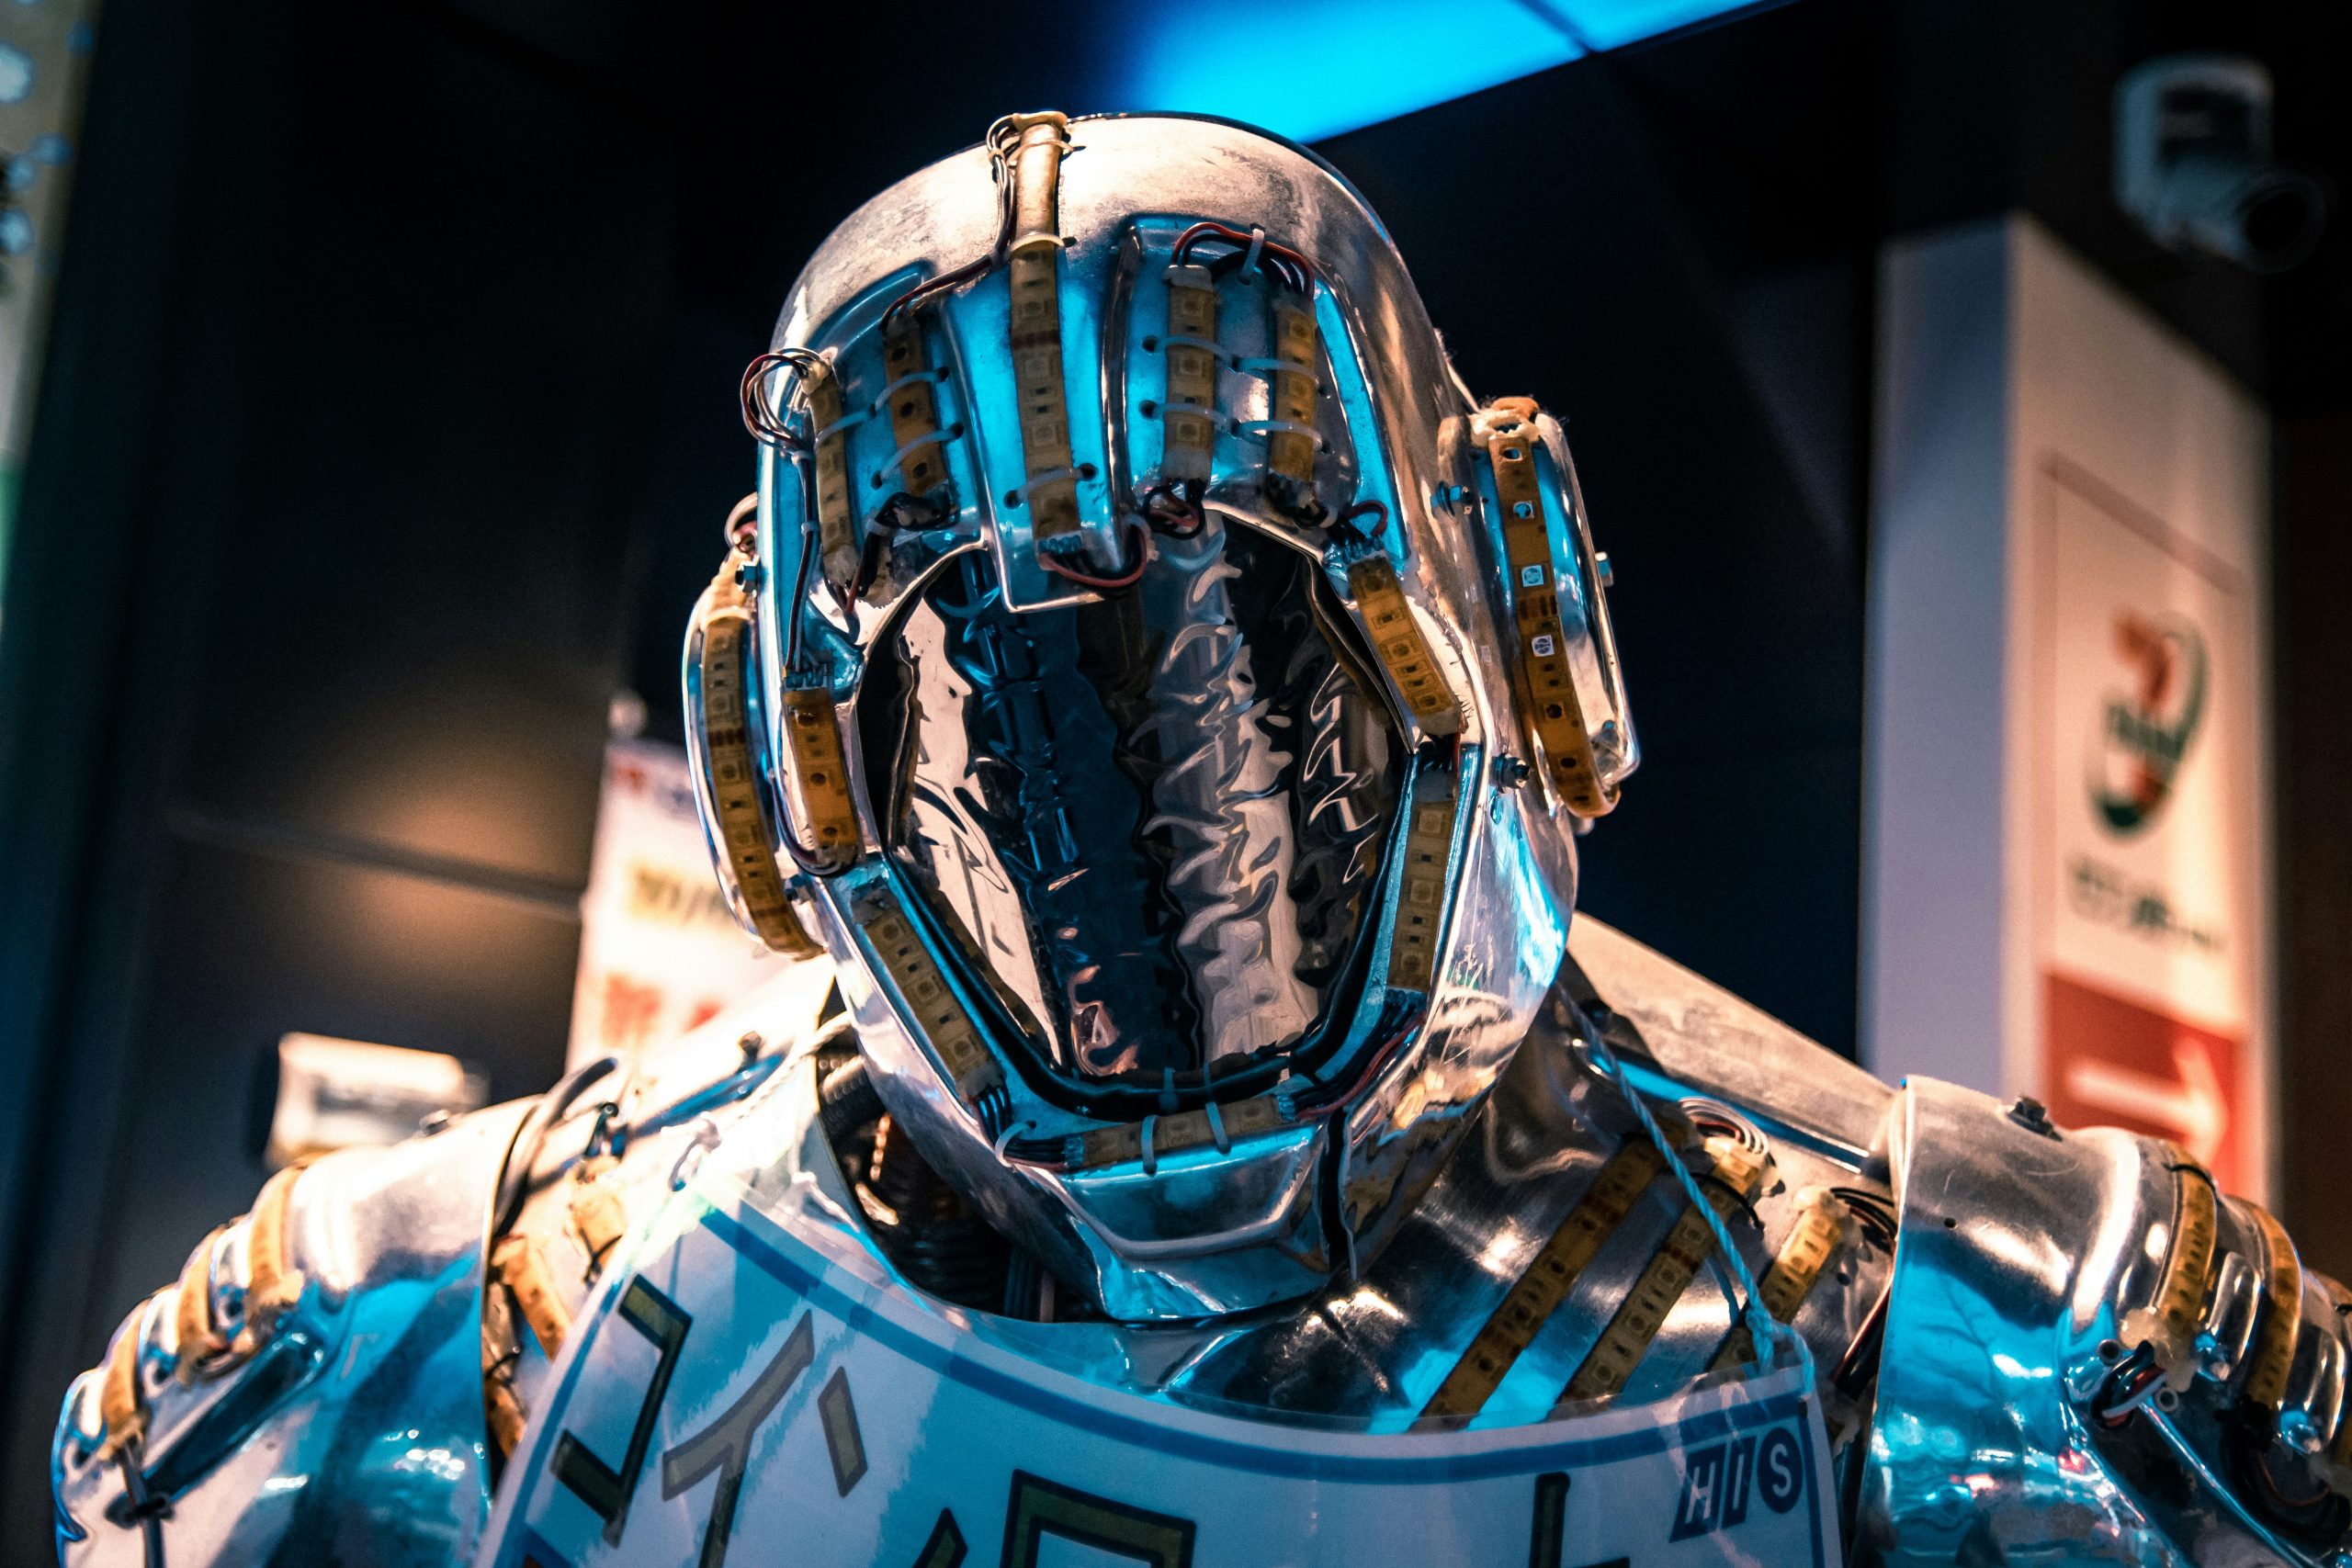 A robot. Photo by Maximalfocus on Unsplash. https://unsplash.com/photos/blue-and-black-helmet-on-blue-and-white-textile-0n4jhVGS4zs